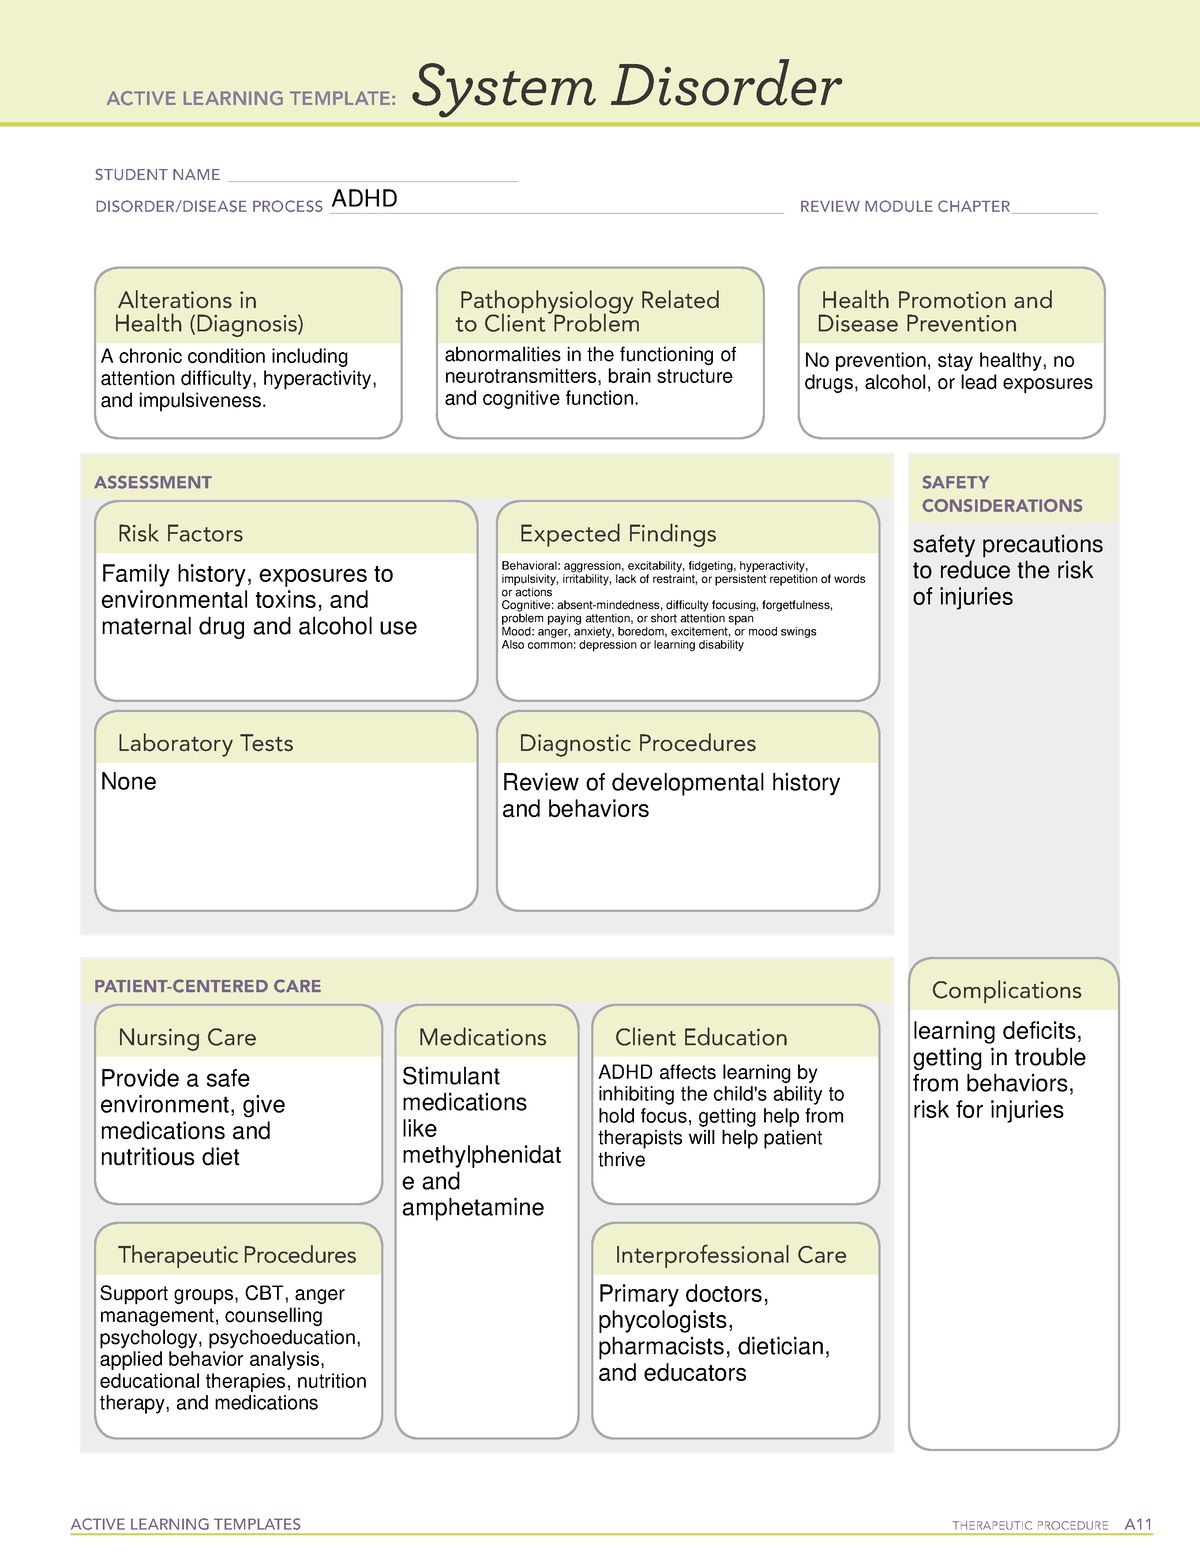 adhd-system-disorder-template-ati-active-learning-template-system-disorder-student-adhd